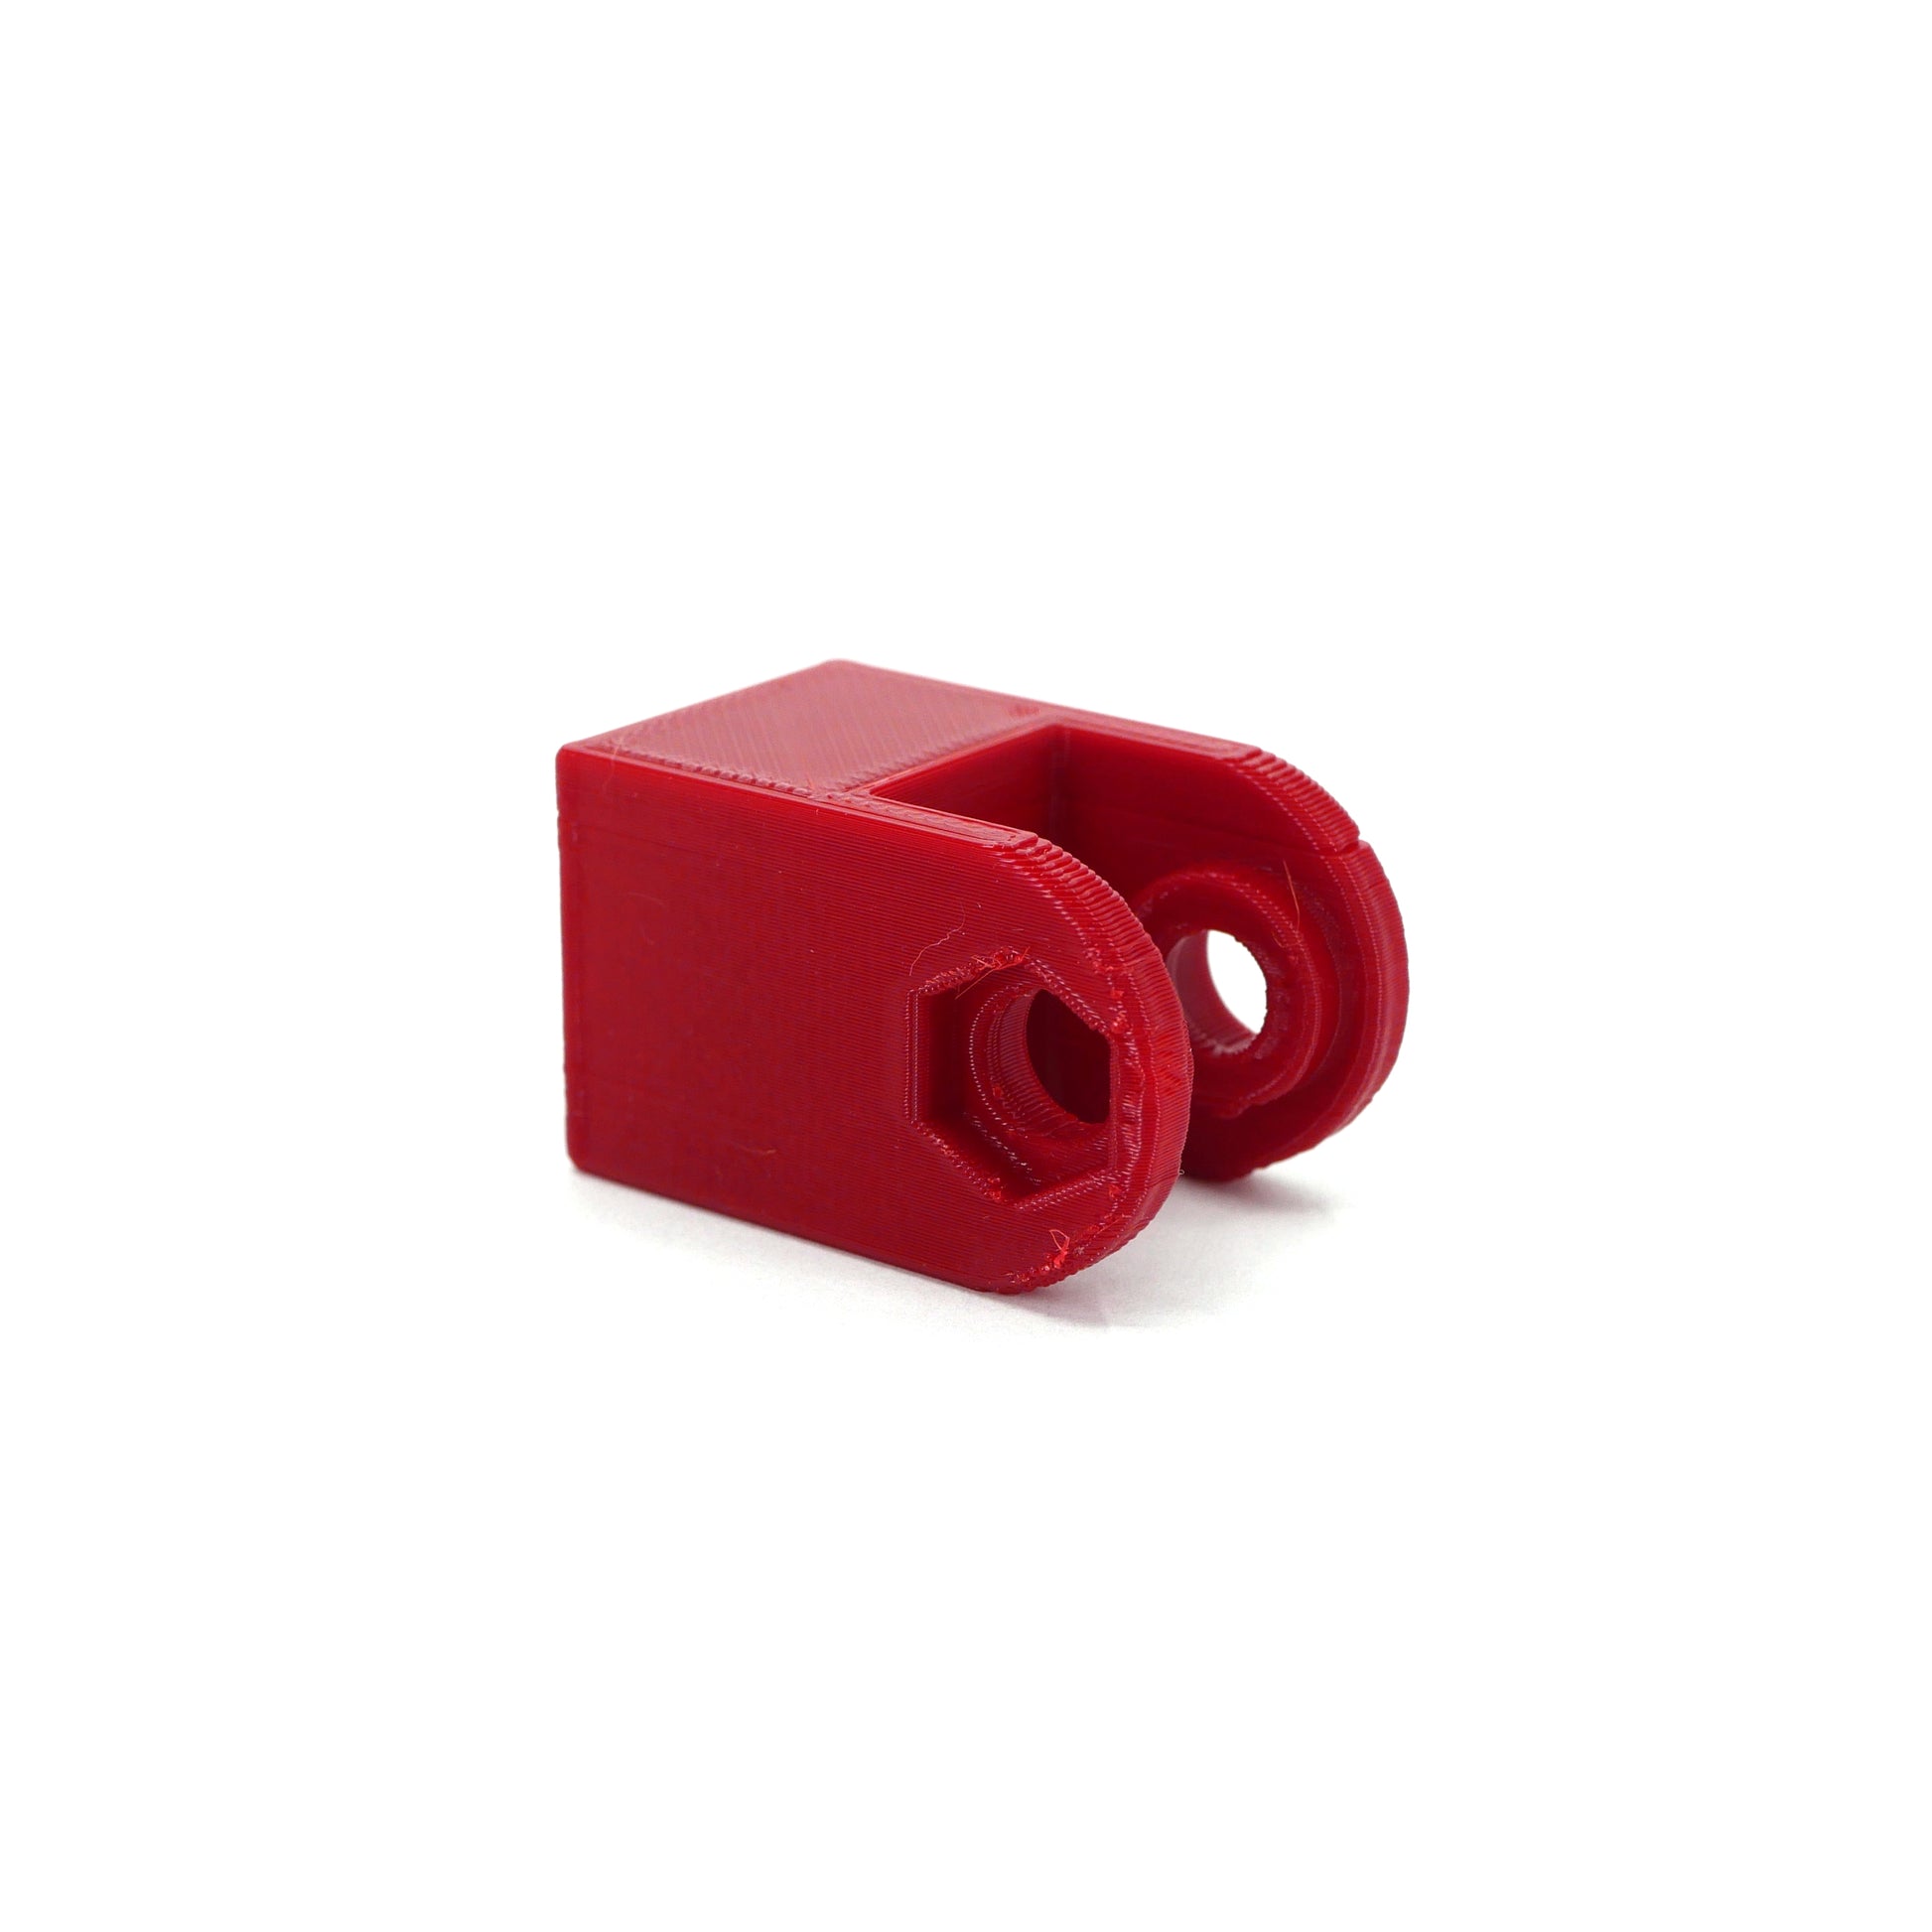 A red HyperX QuadCast microphone mount adapter.